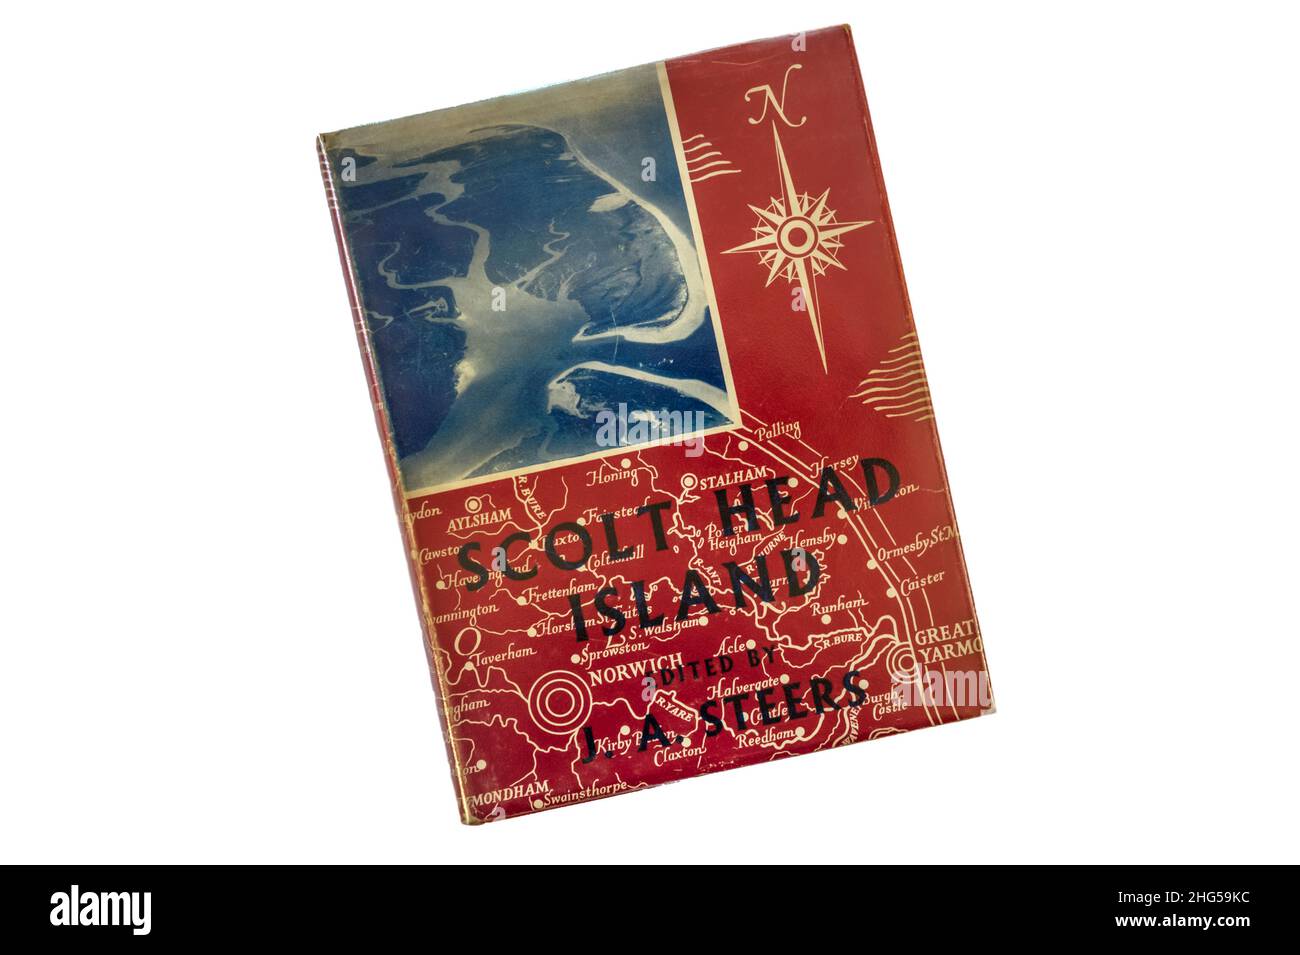 Scolt Head Island by J. A. Steers. First published in 1934, photograph shows 1960 revised edition. Stock Photo